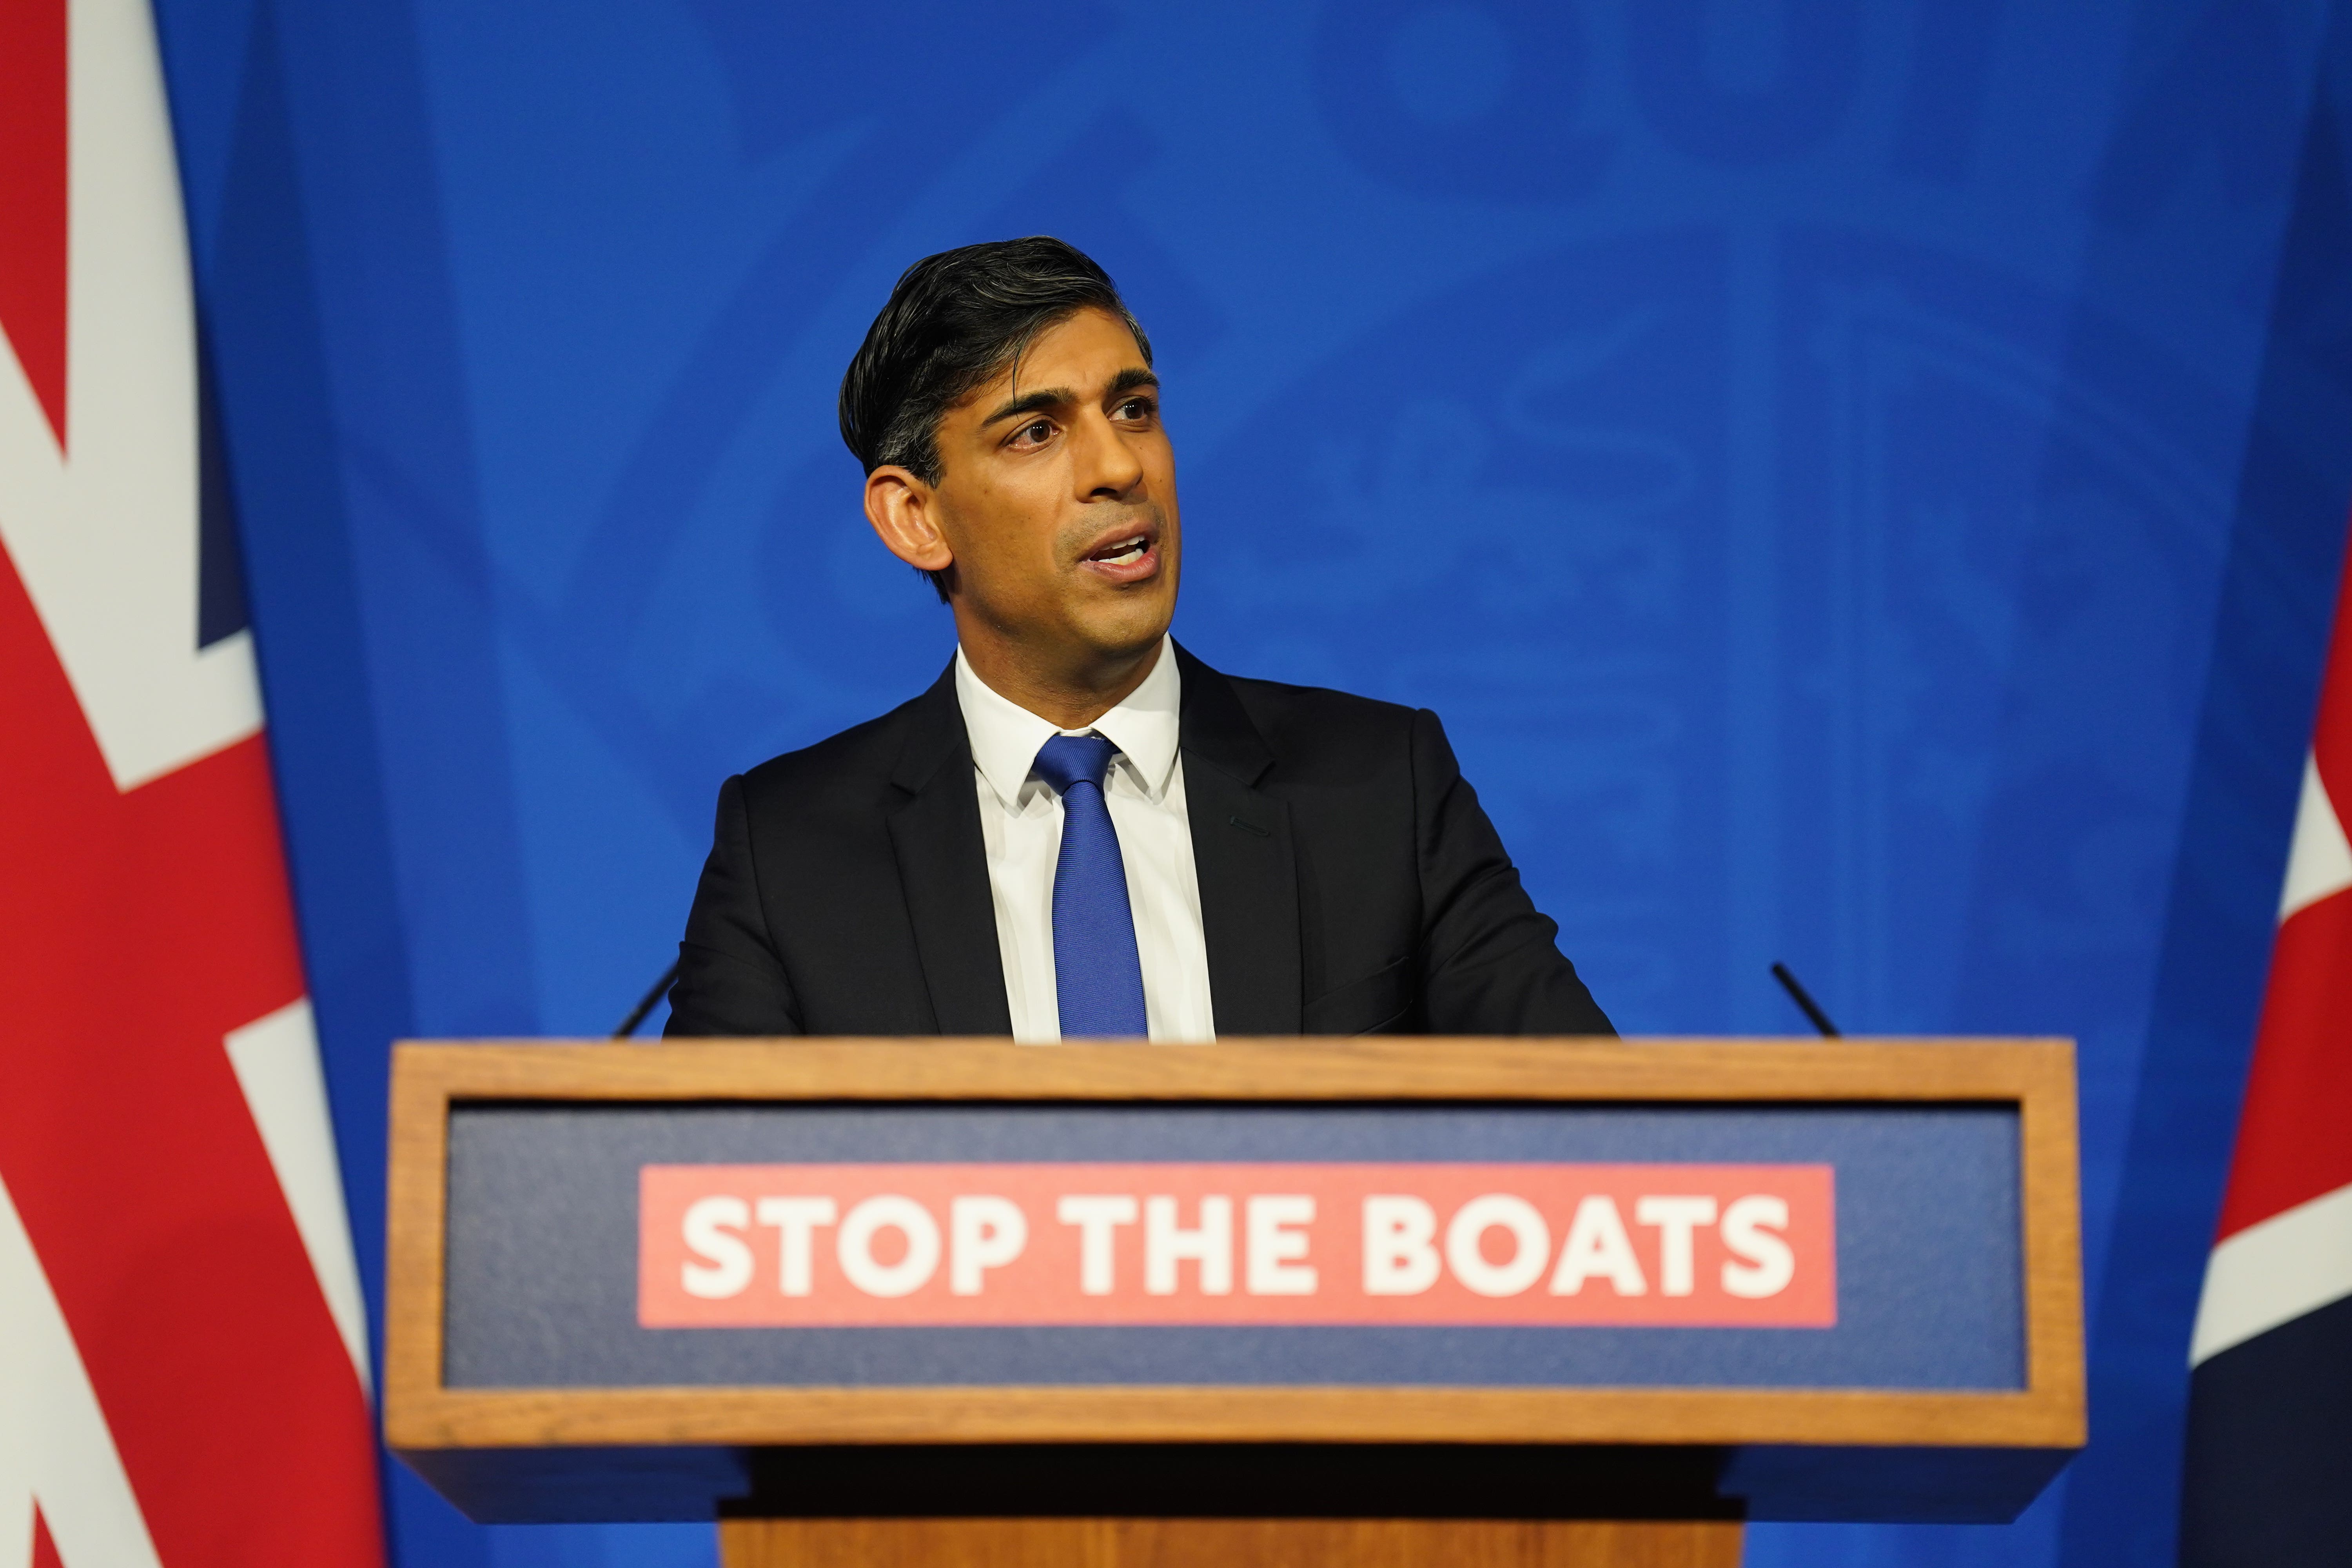 Prime Minister Rishi Sunak during a press conference in the Downing Street Briefing Room (PA)